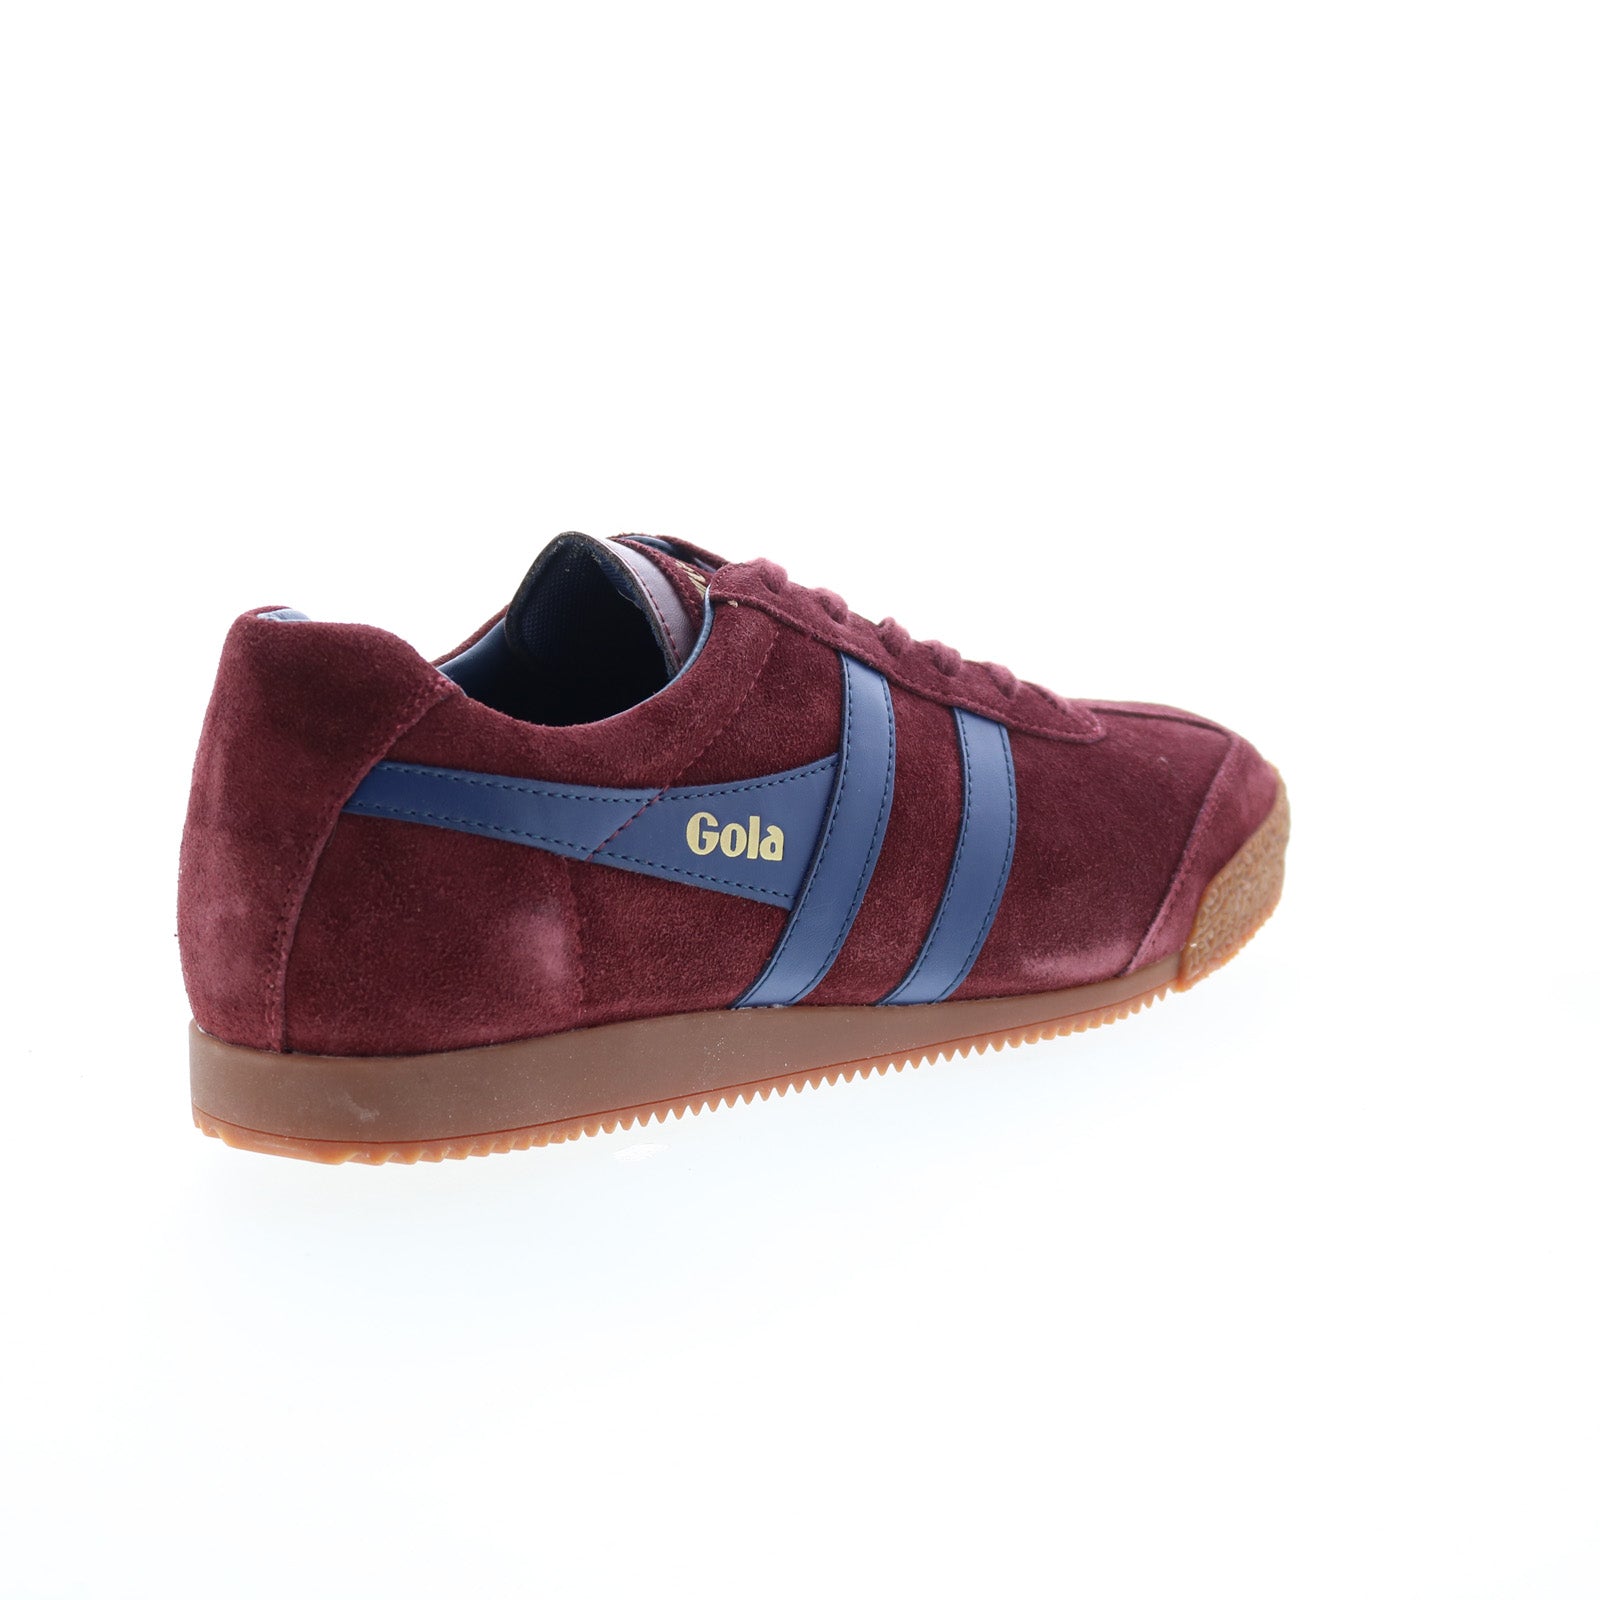 Gola Harrier Suede CMA192 Mens Burgundy Suede Lifestyle Sneakers Shoes